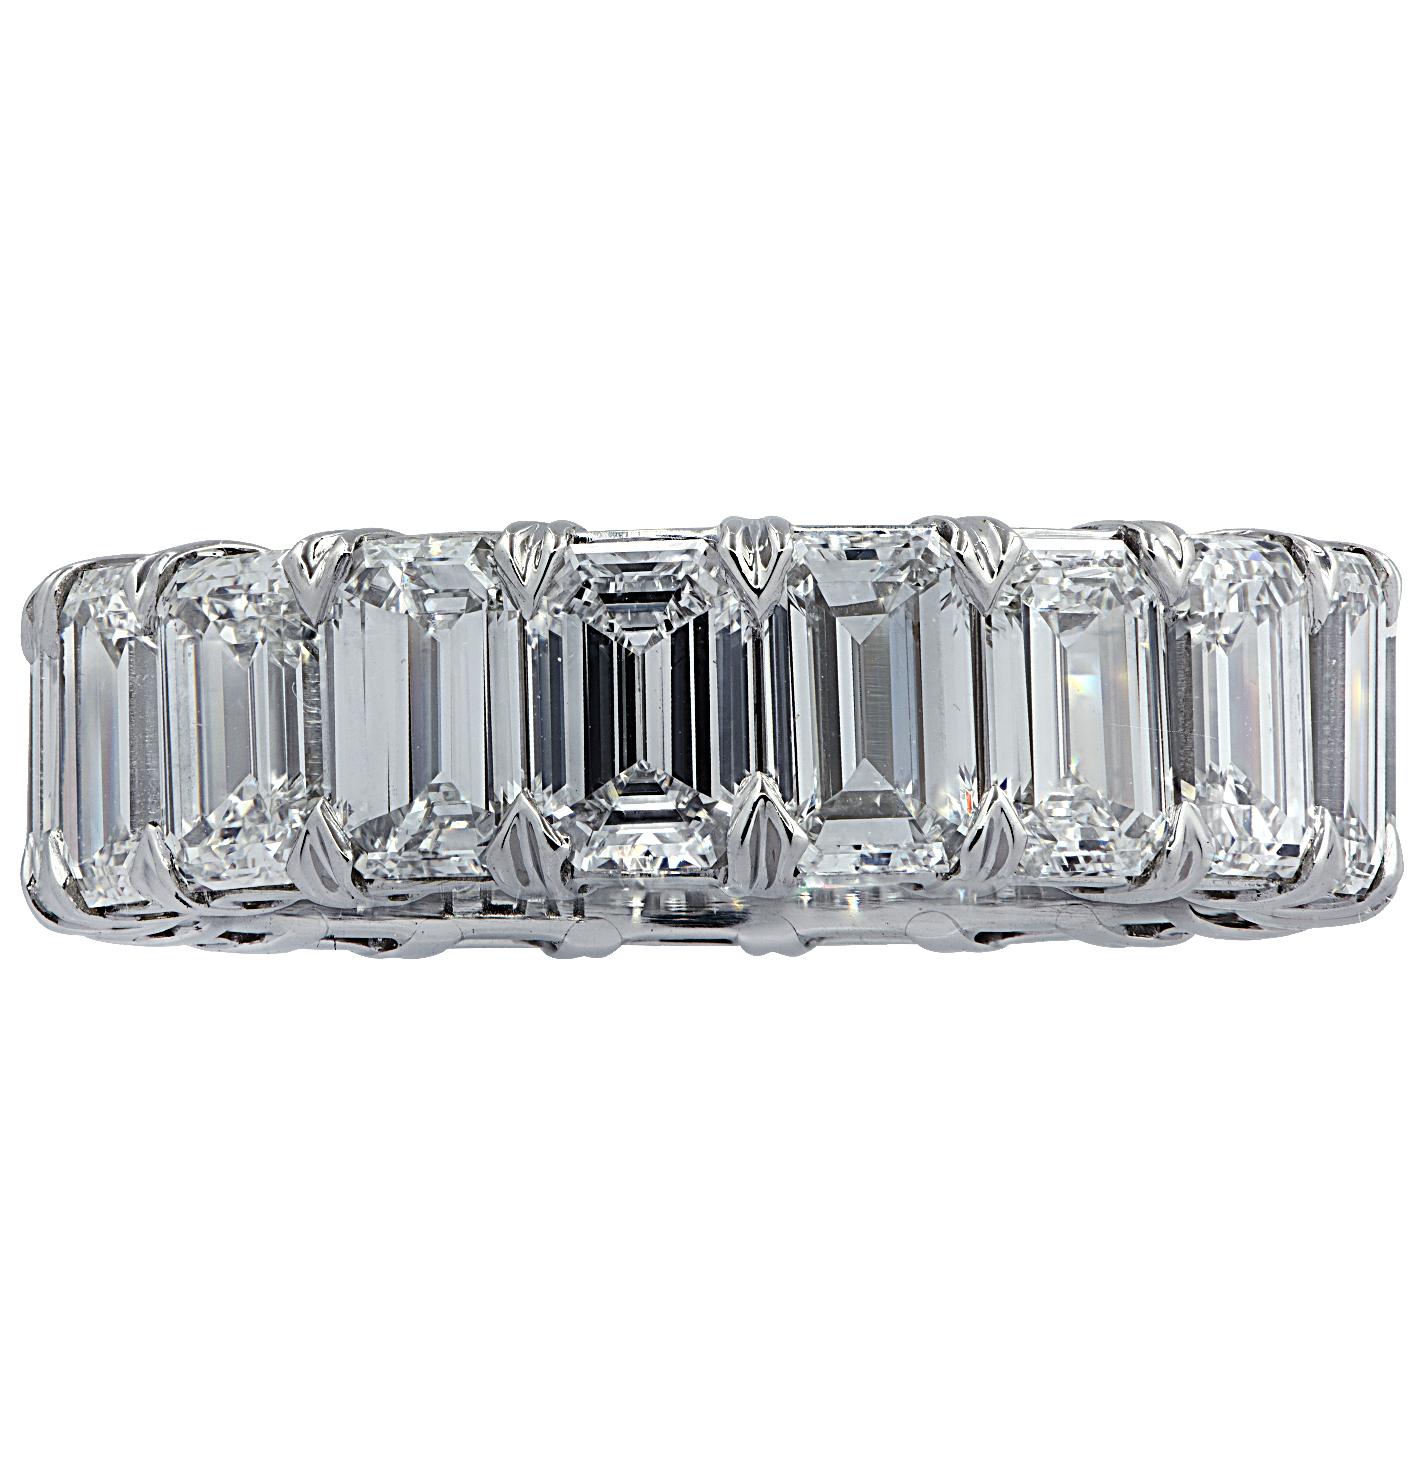 Exquisite Vivid Diamonds eternity band crafted in Platinum, showcasing 19 stunning emerald cut diamonds weighing 6.38 carats total, D-E color, VVS-VS clarity. Each diamond was carefully selected, perfectly matched and set in a seamless sea of